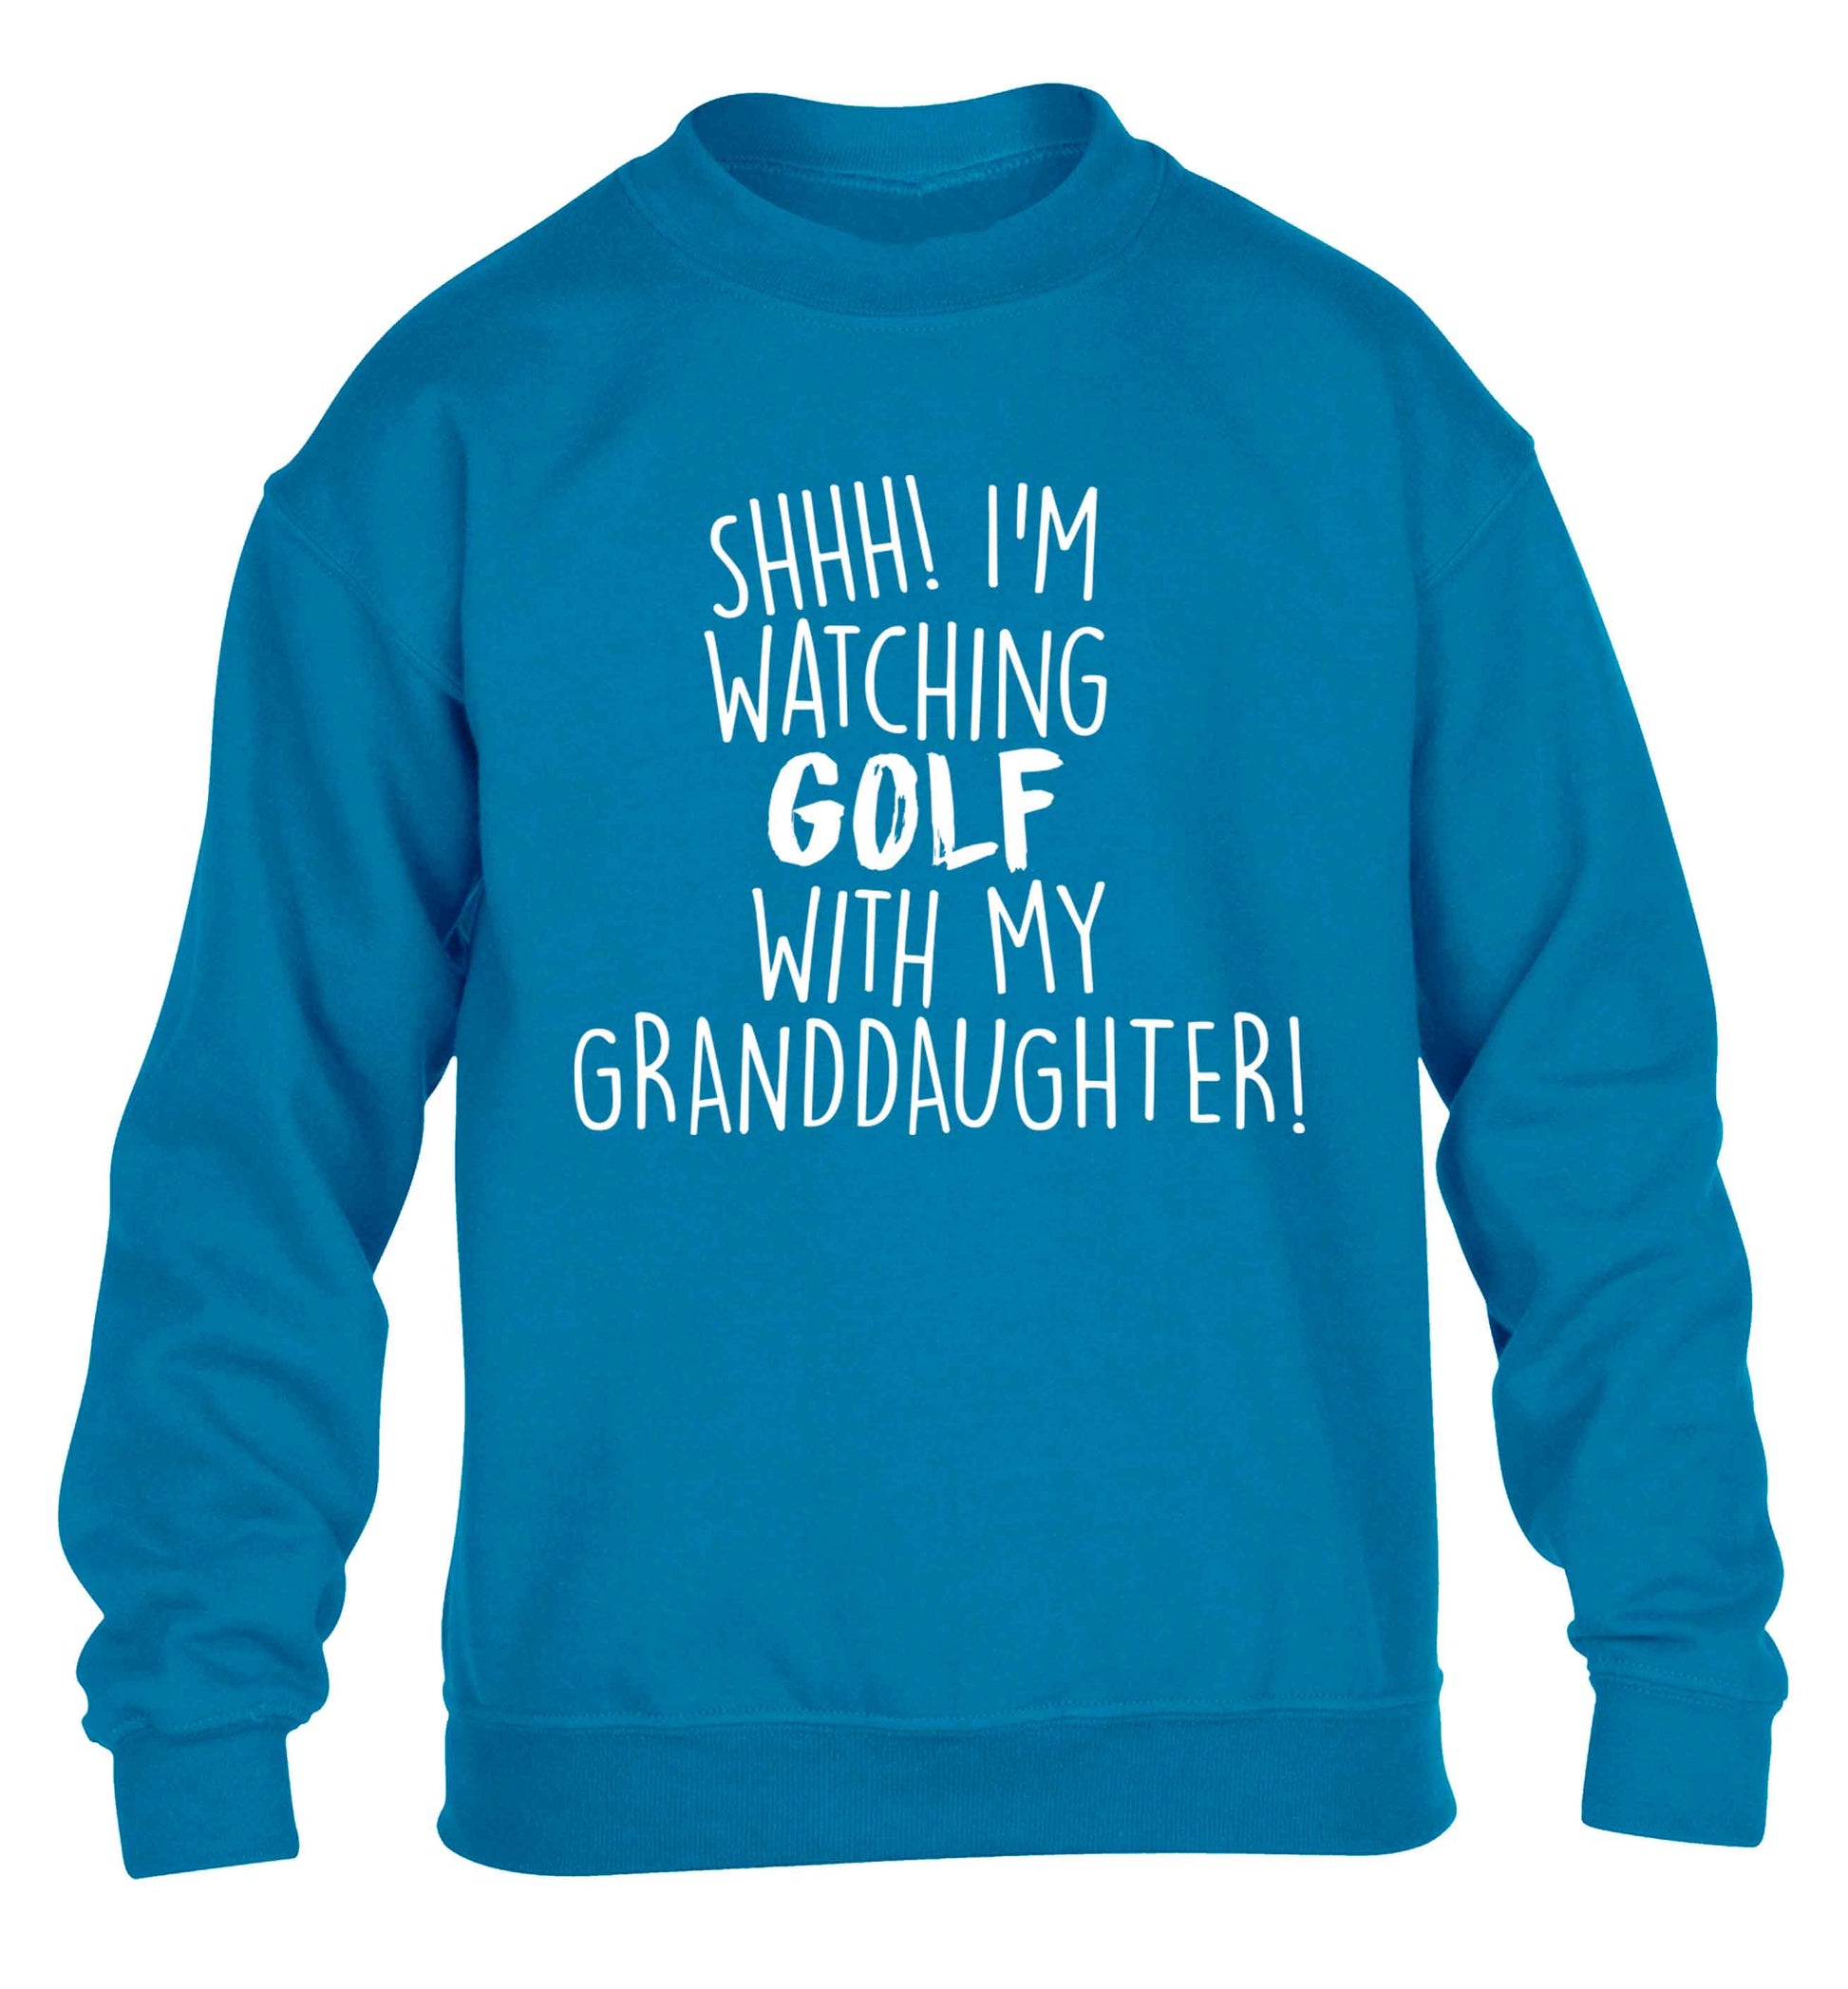 Shh I'm watching golf with my granddaughter children's blue sweater 12-13 Years